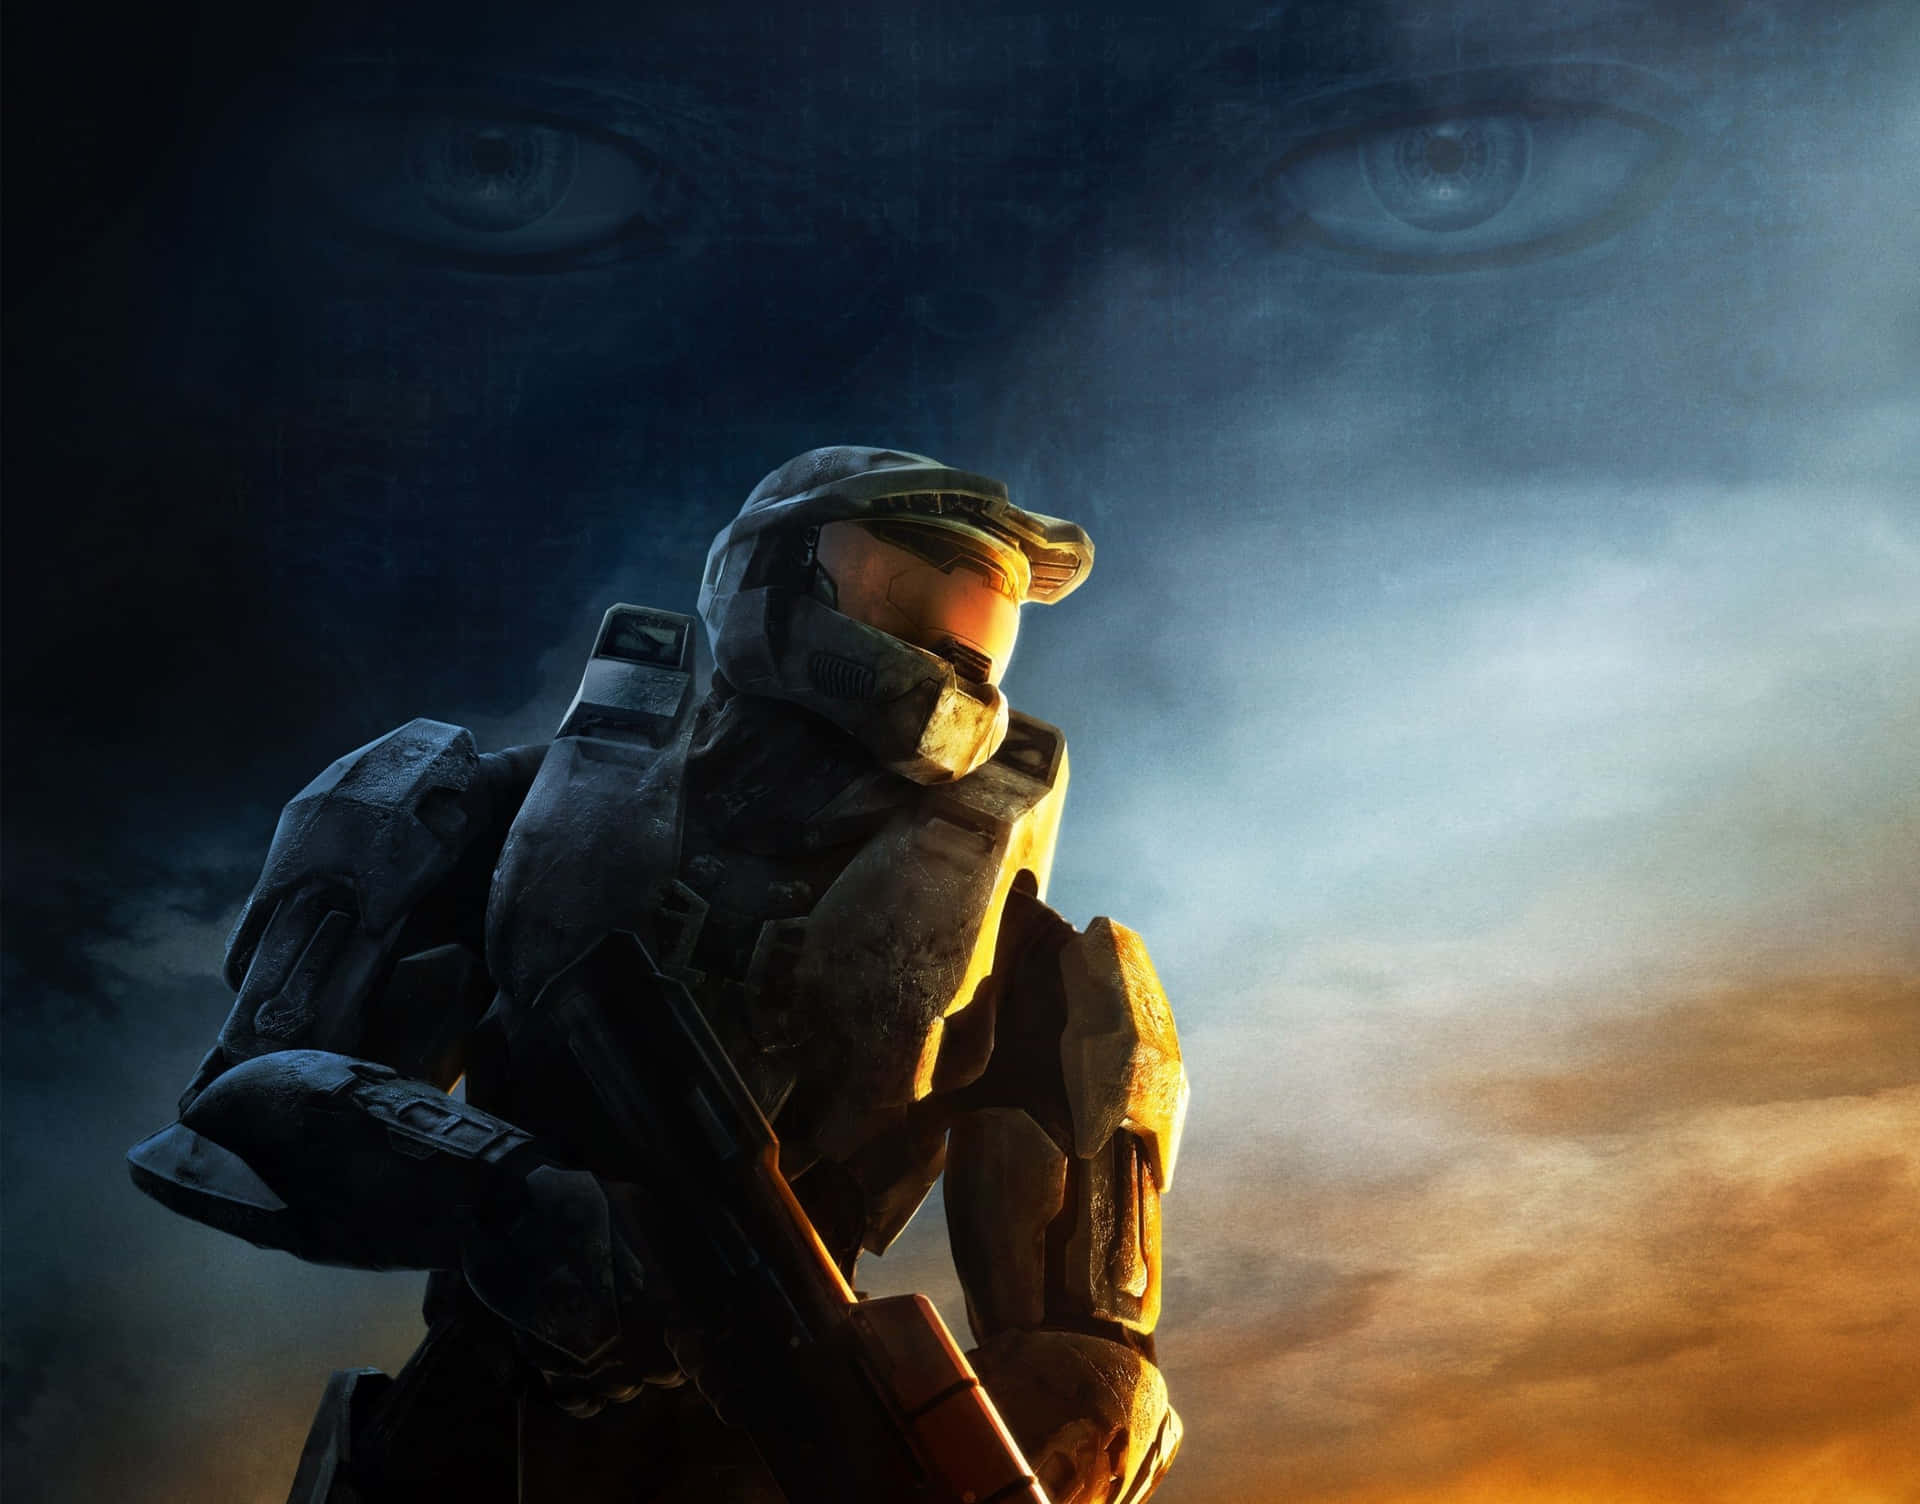 Master Chief takes the fight to the Covenant in Halo Wallpaper